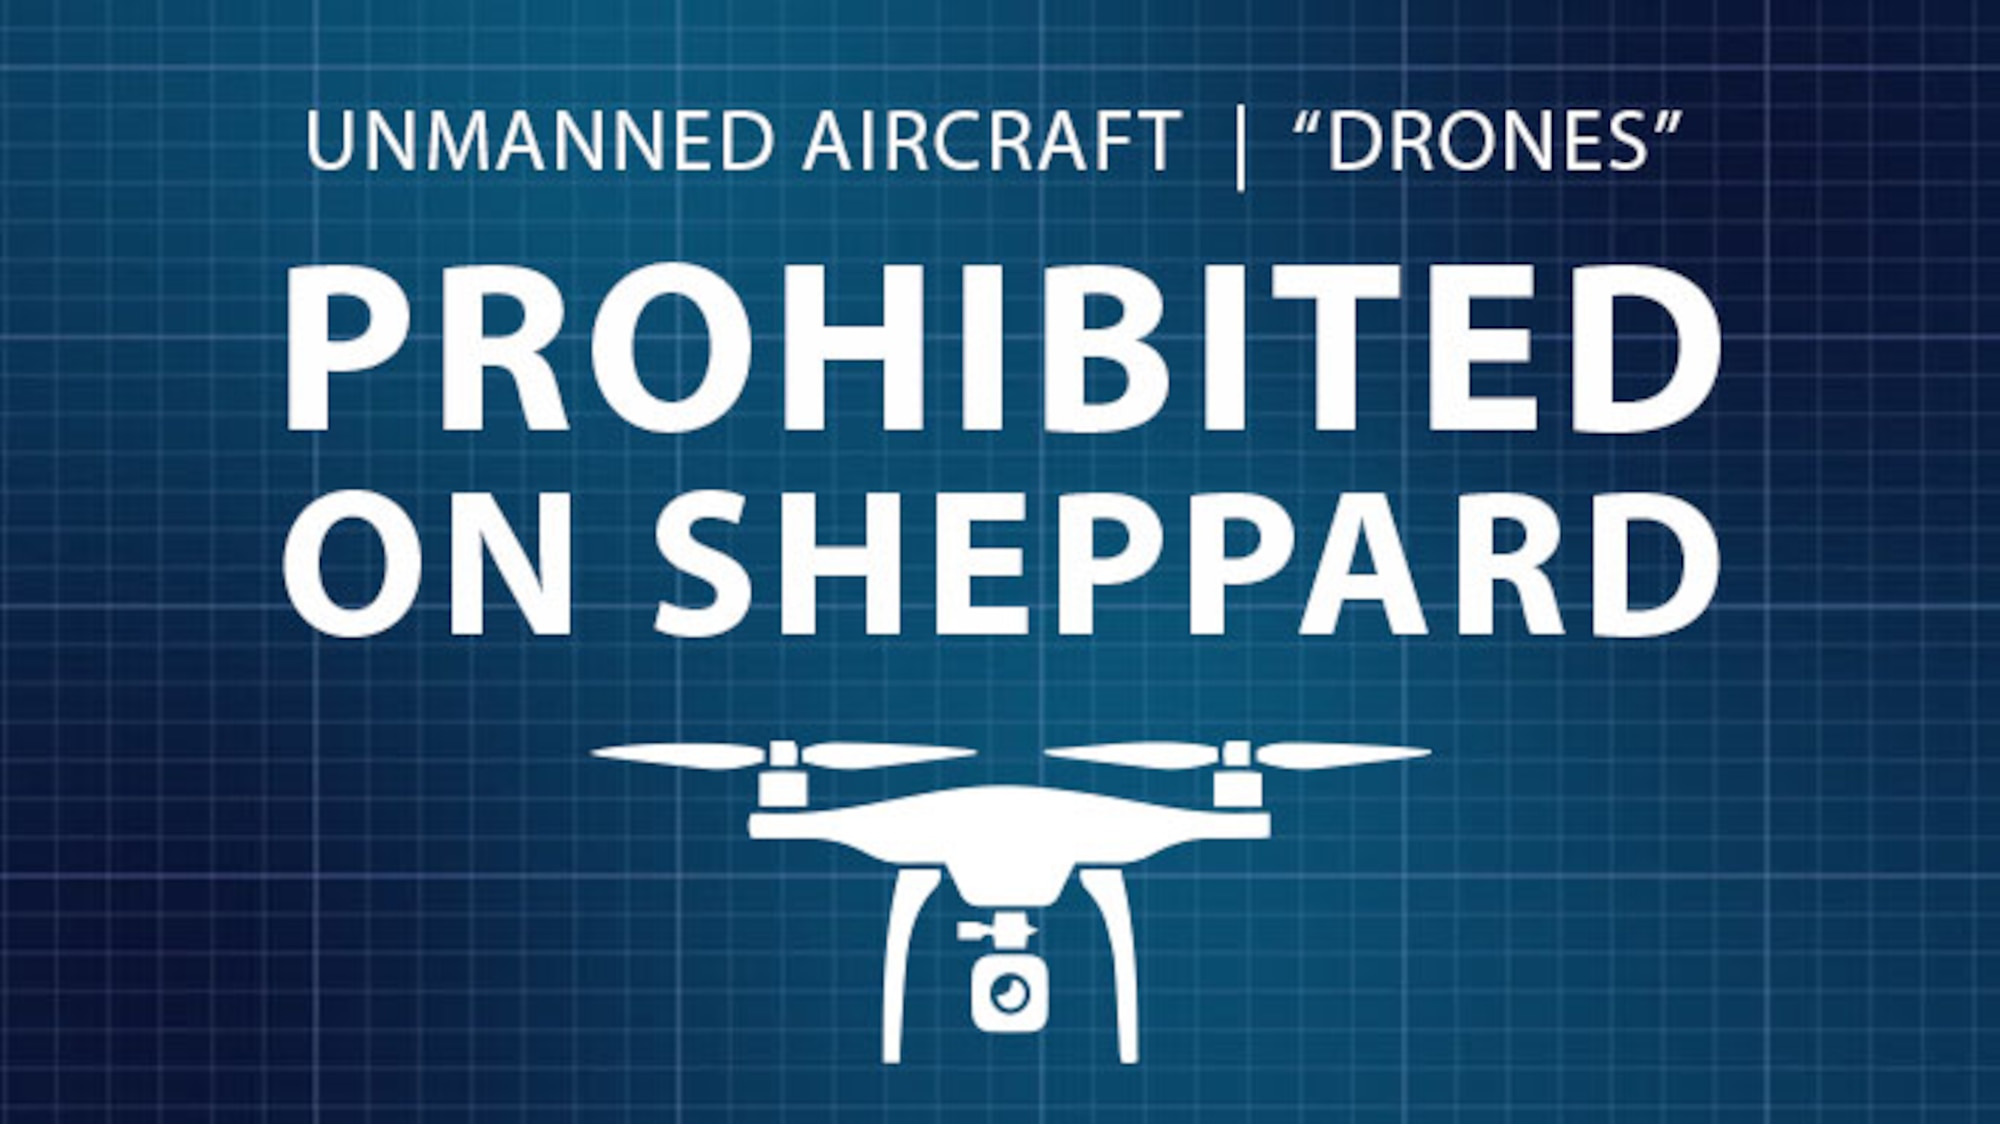 It is important for base residents and local community members to understand the Sheppard Air Force Base Instruction 13-204, which states remotely operated aircraft operations are not authorized on or near Sheppard. The airspace used by the Euro-NATO Joint Jet Pilot Training Program, is one of the busiest airspaces in the nation. Drones not only pose a risk to the manned flight operations of the military, commercial and civilian aircraft, but also to the individuals on the ground.
